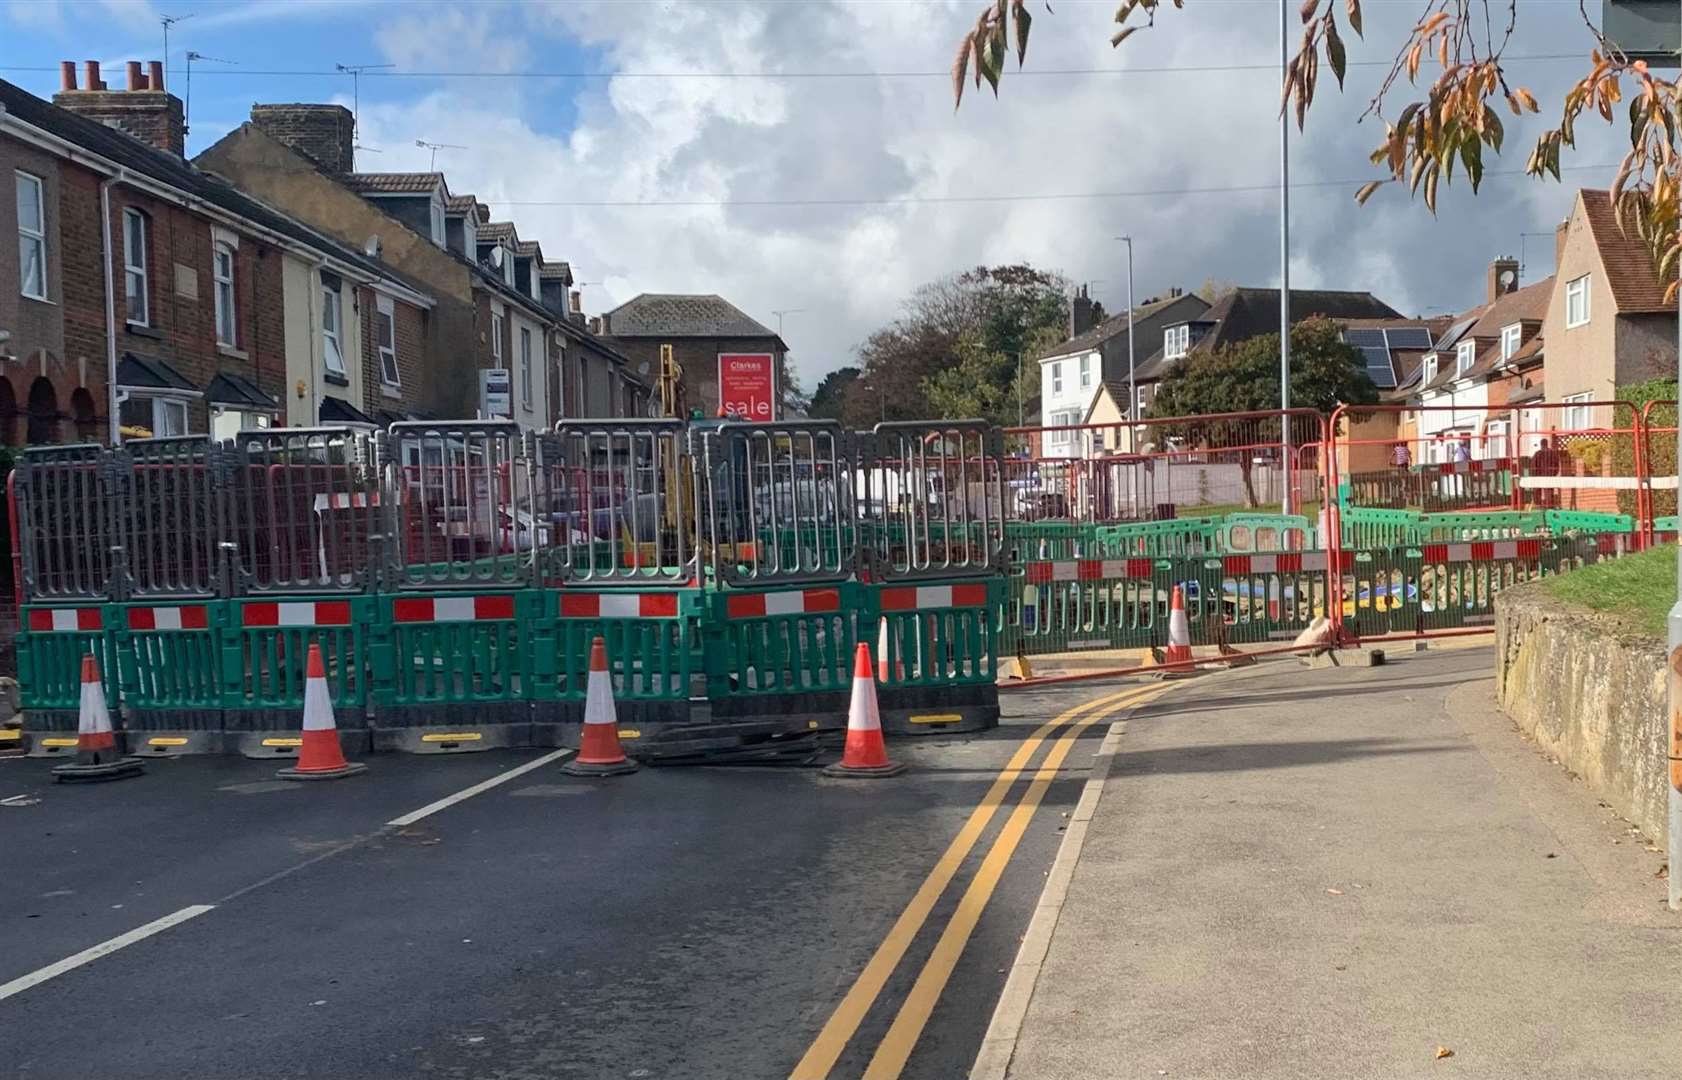 The road closure will stay another week